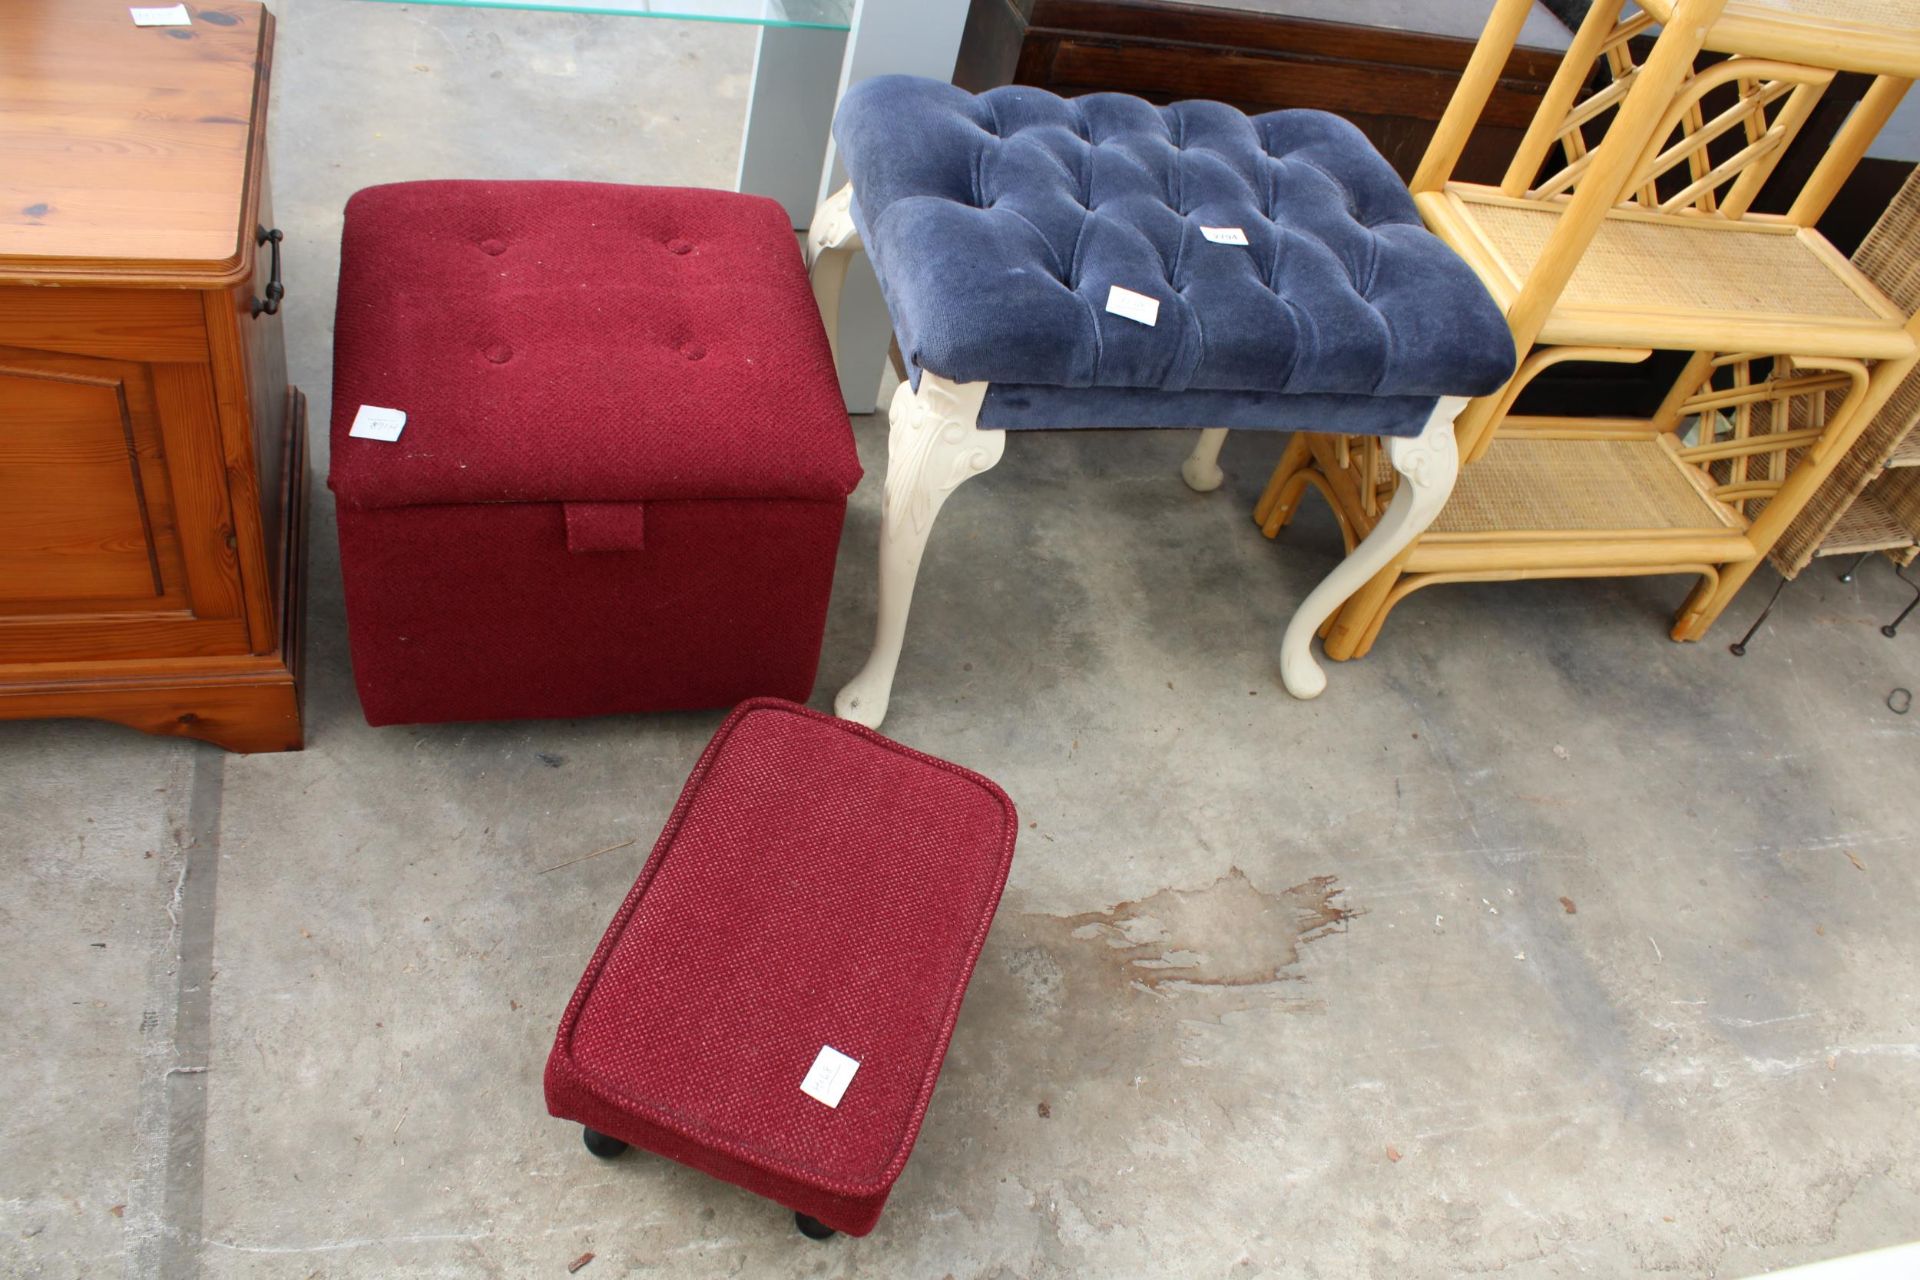 TWO MODERN STOOLS AND AN OTTOMAN